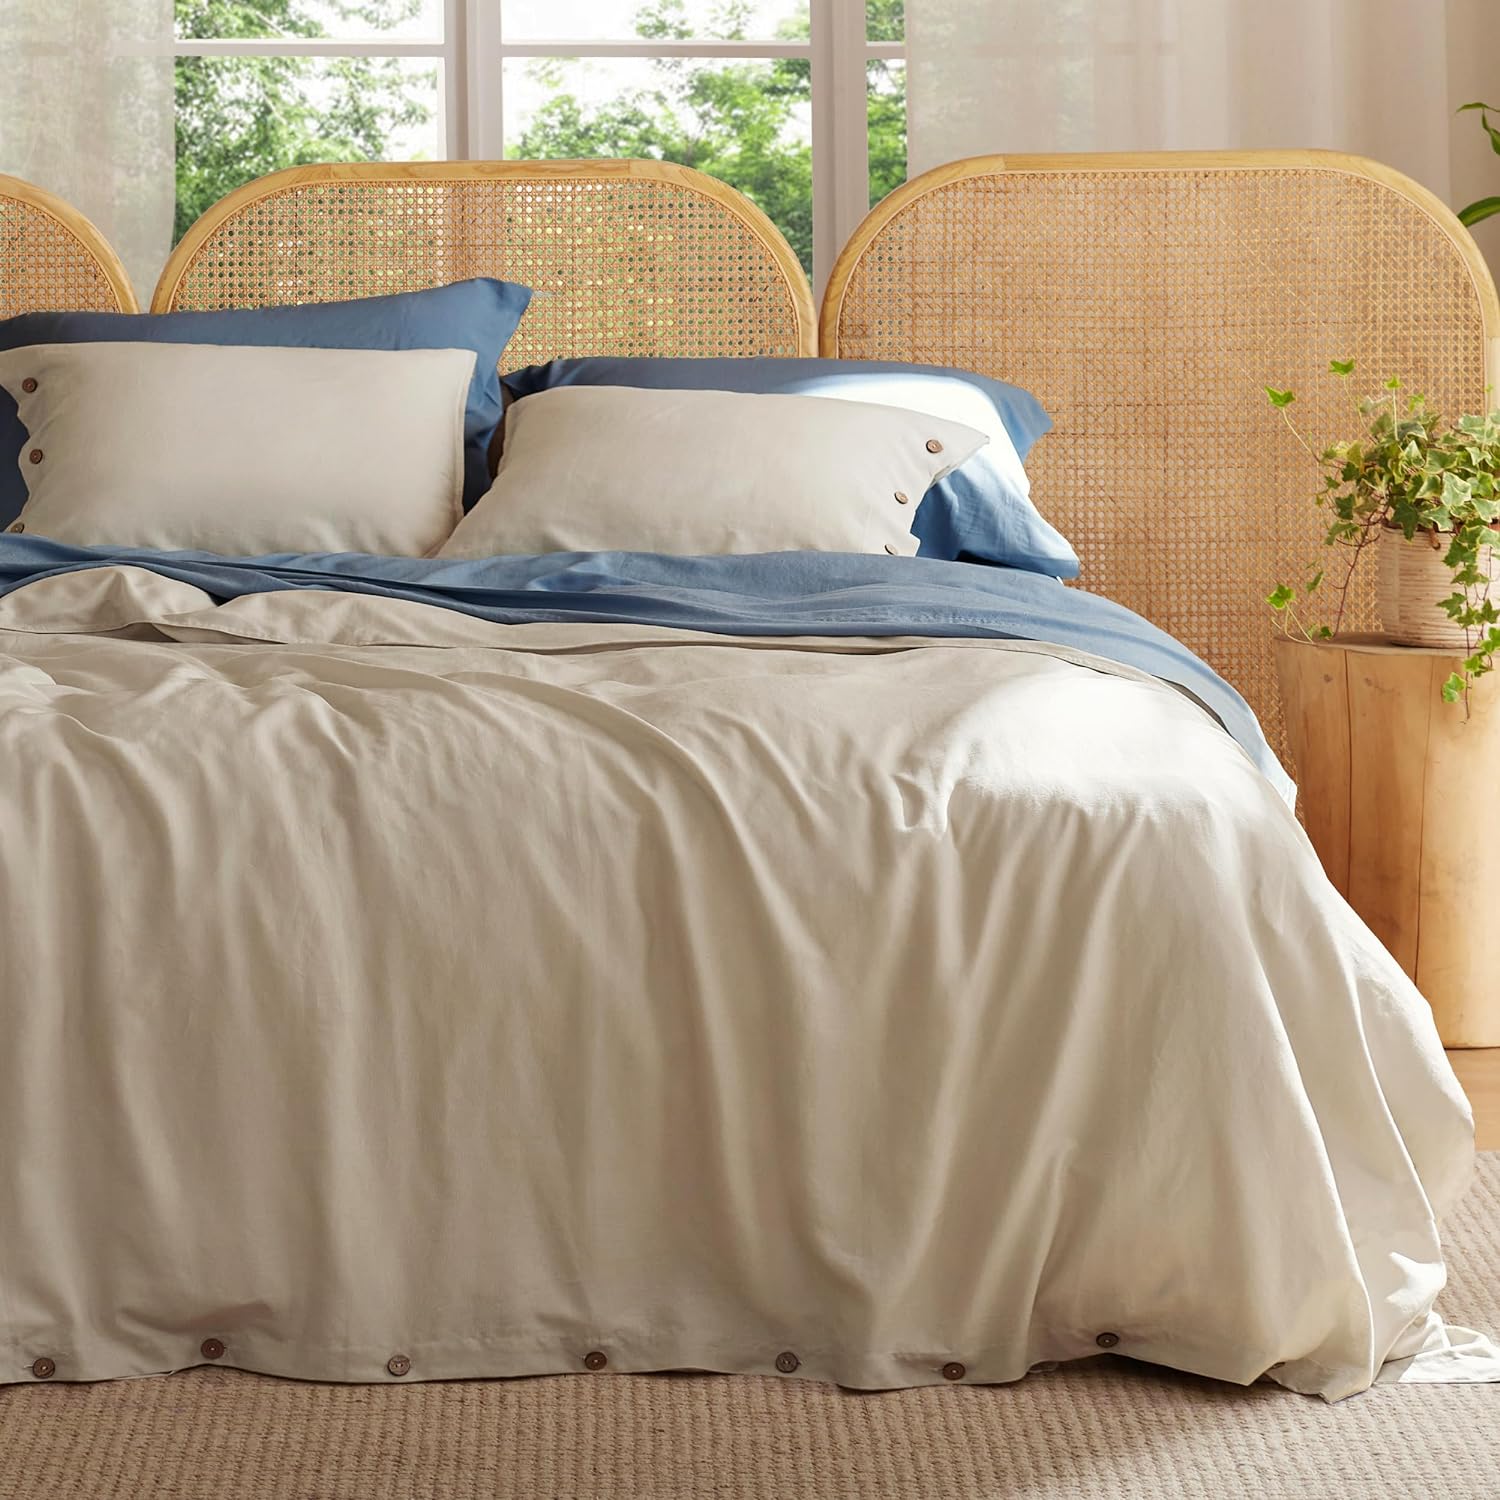 Rayon Derived from Bamboo and Linen Duvet Cover Set